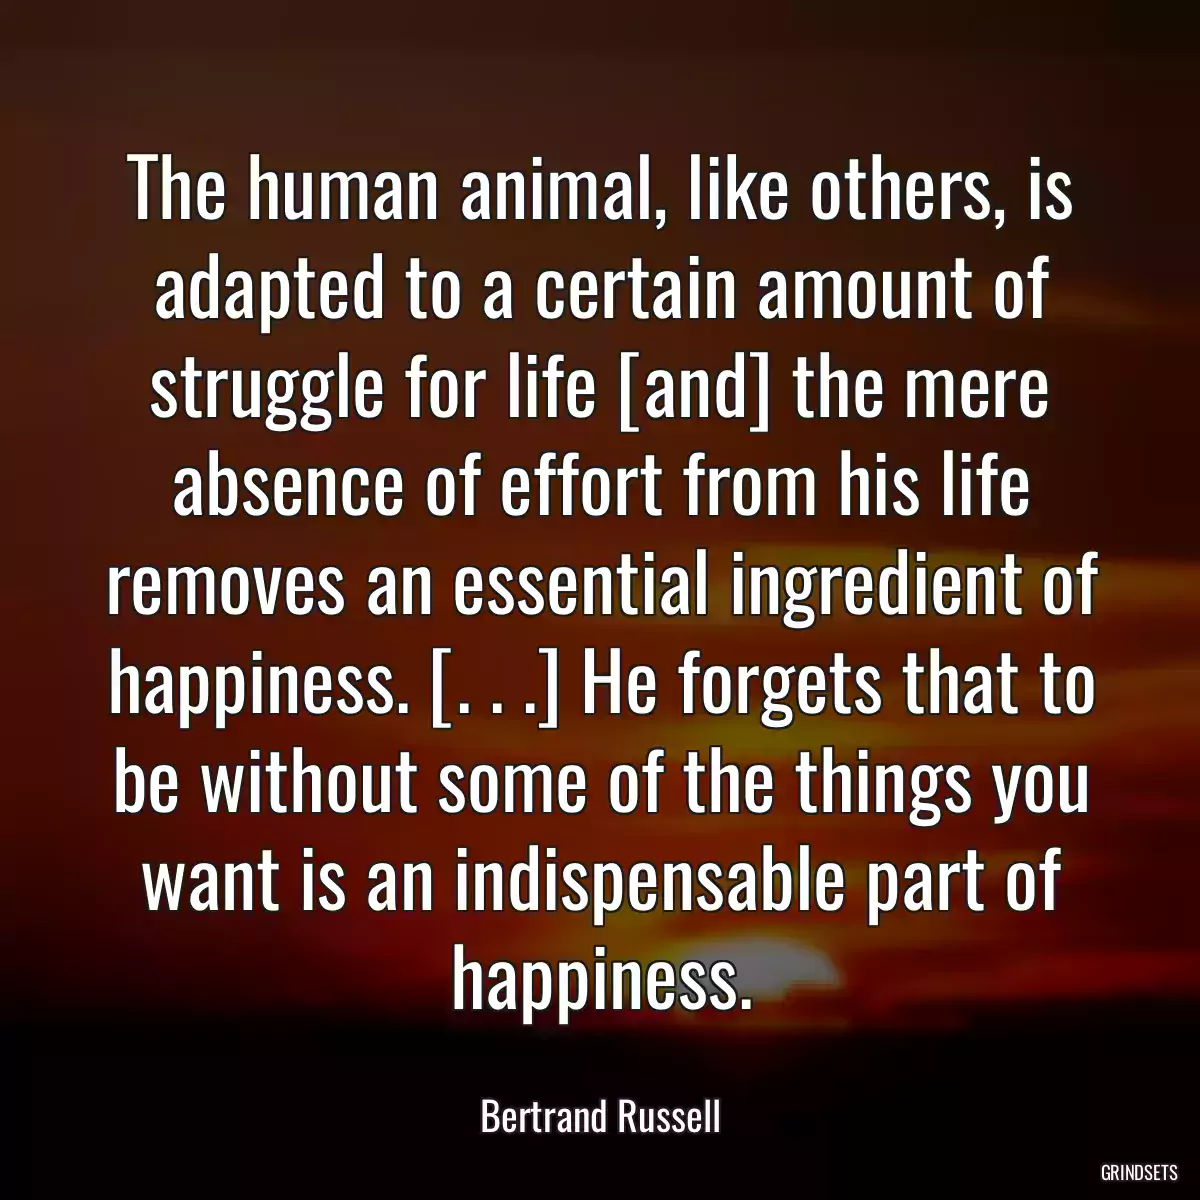 The human animal, like others, is adapted to a certain amount of struggle for life [and] the mere absence of effort from his life removes an essential ingredient of happiness. [. . .] He forgets that to be without some of the things you want is an indispensable part of happiness.